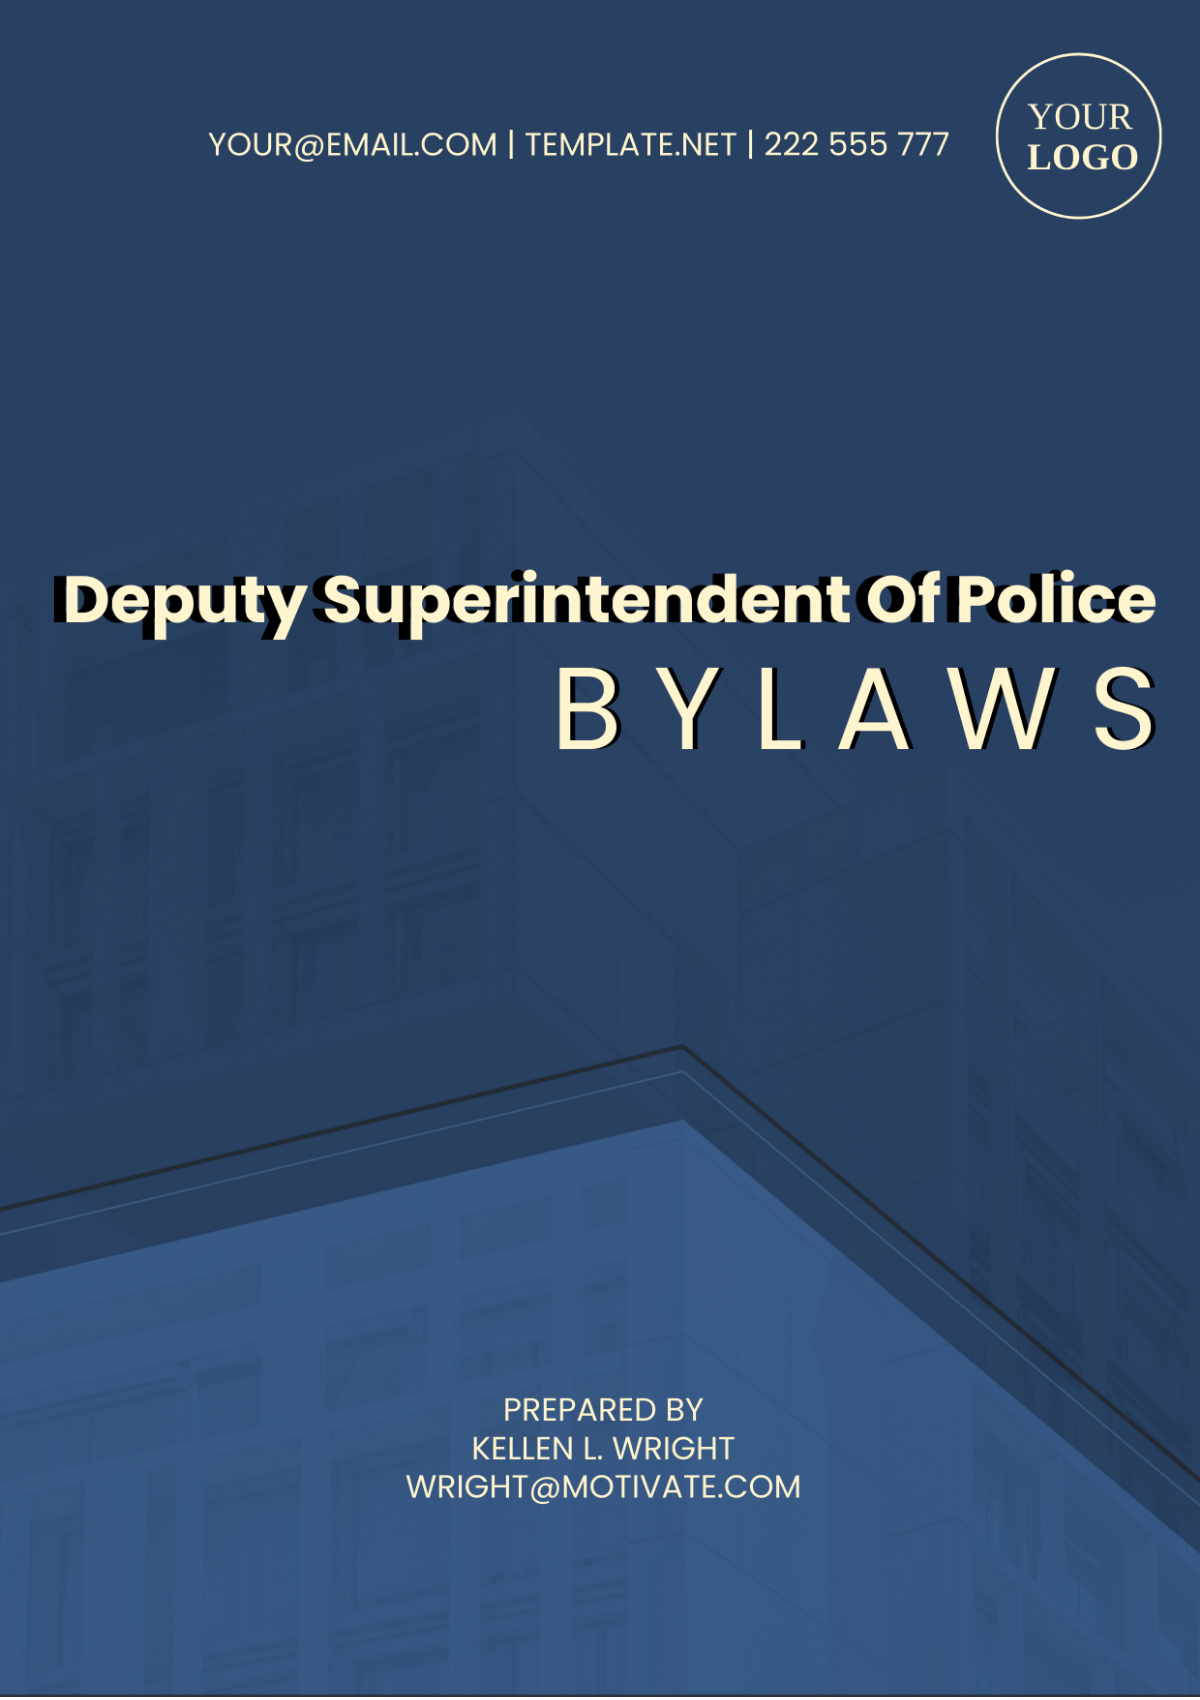 Free Dsp(Deputy Superintendent Of Police) Bylaws Template